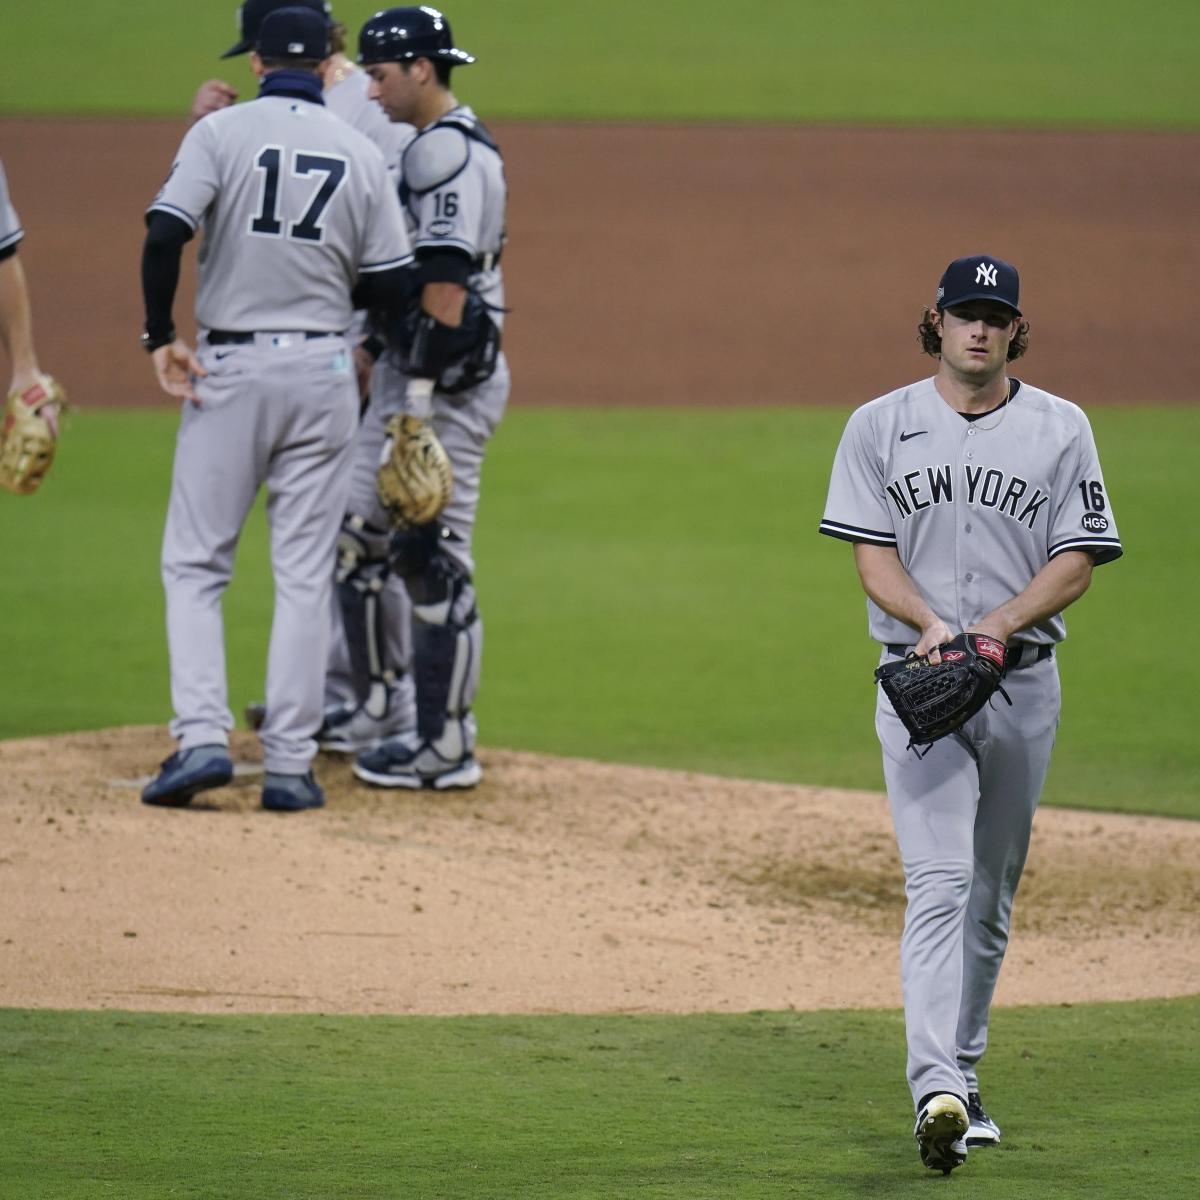 From sign-stealing to sticky stuff, Yankees work the angles